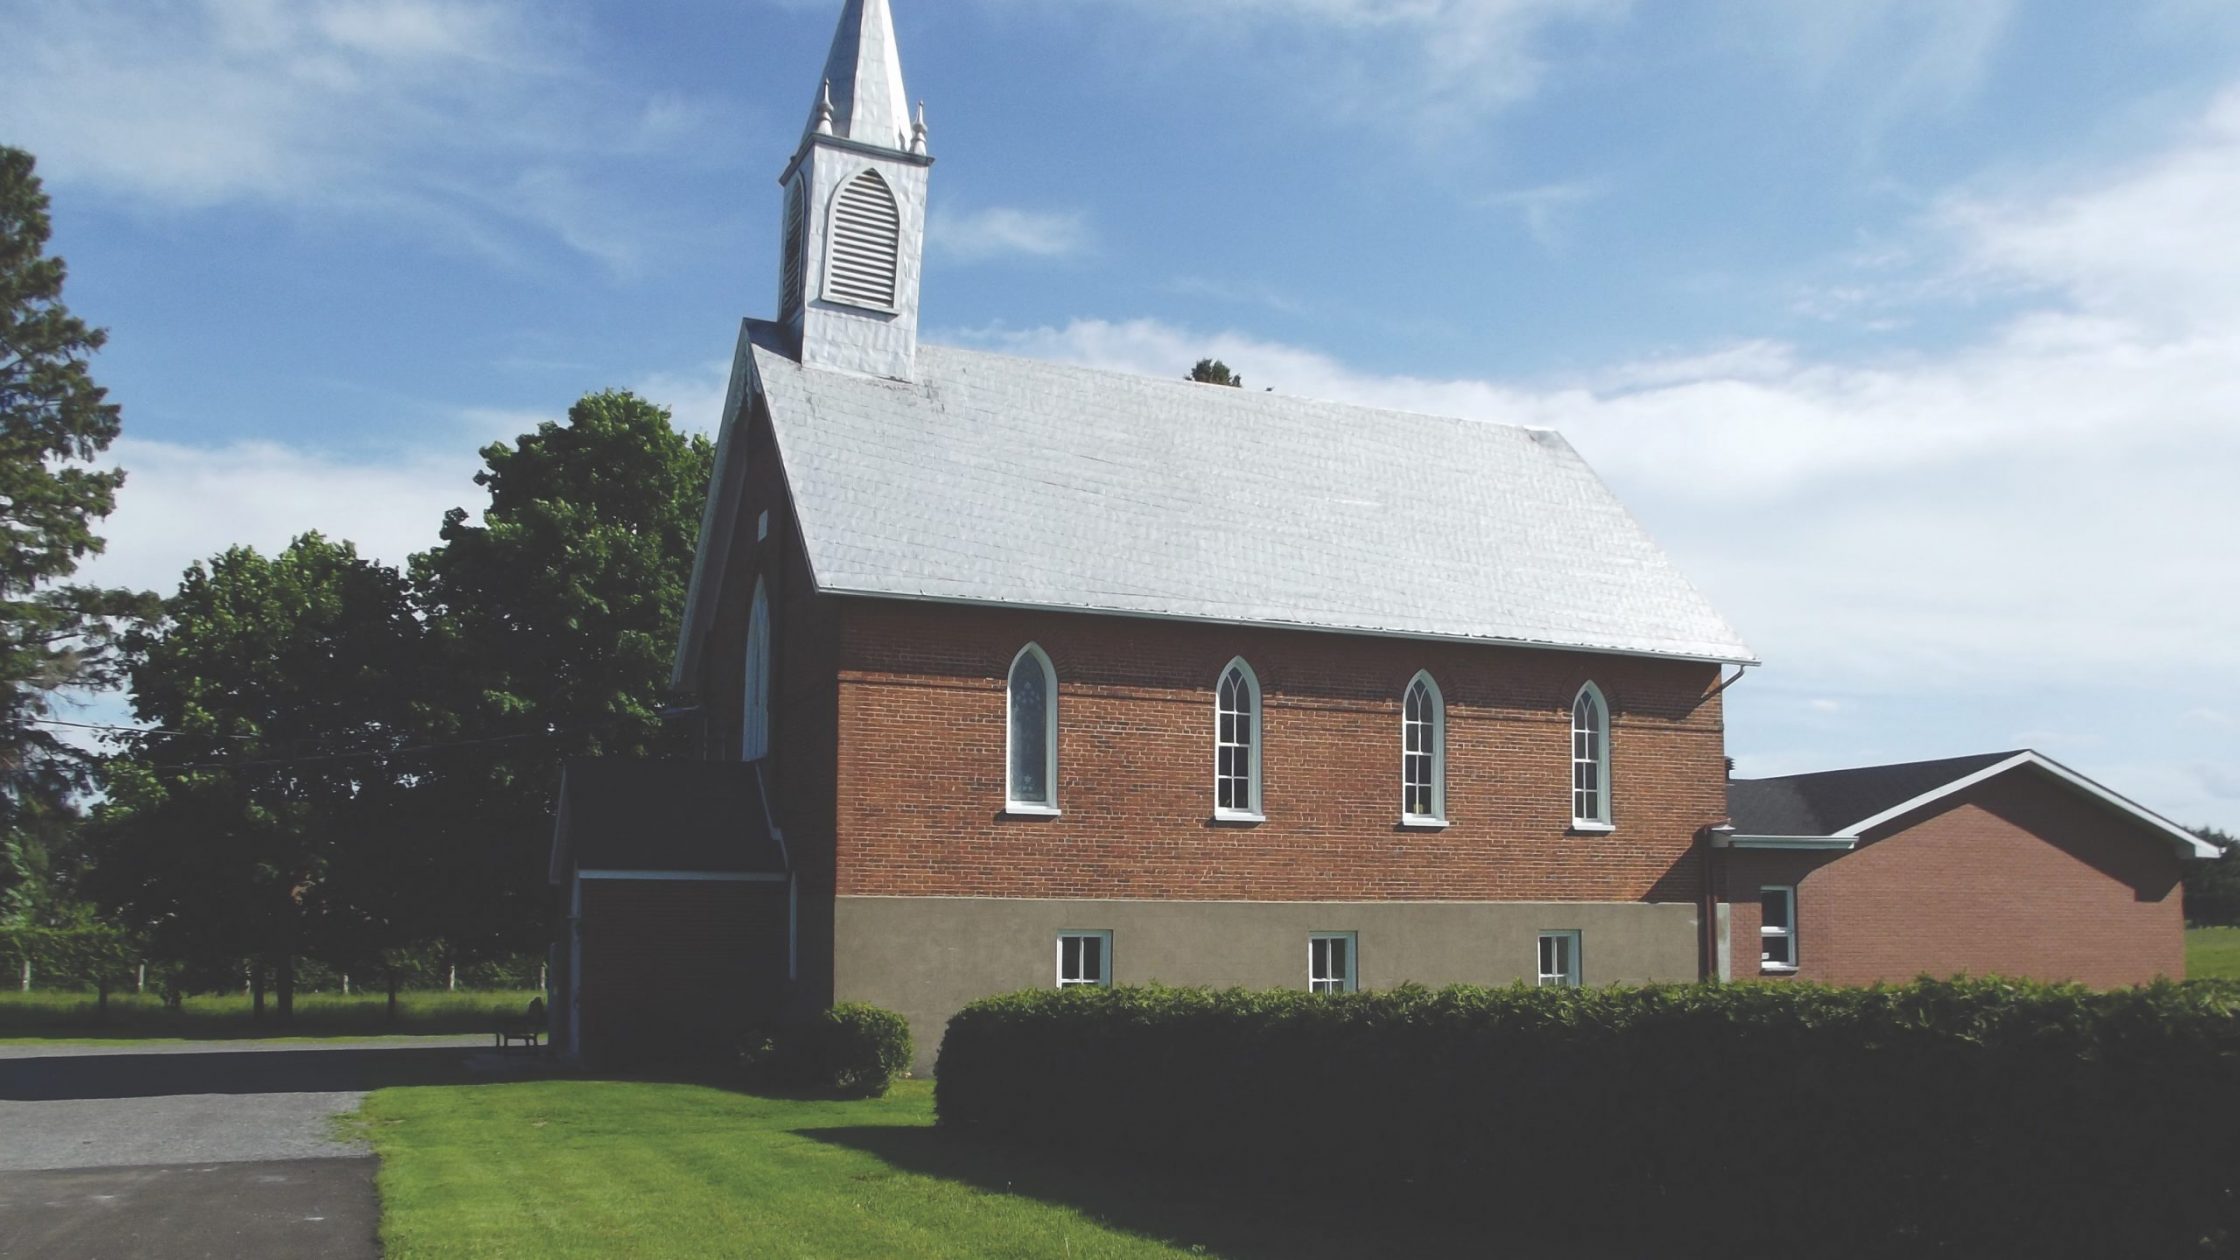 Brick church with green lawn and hedge